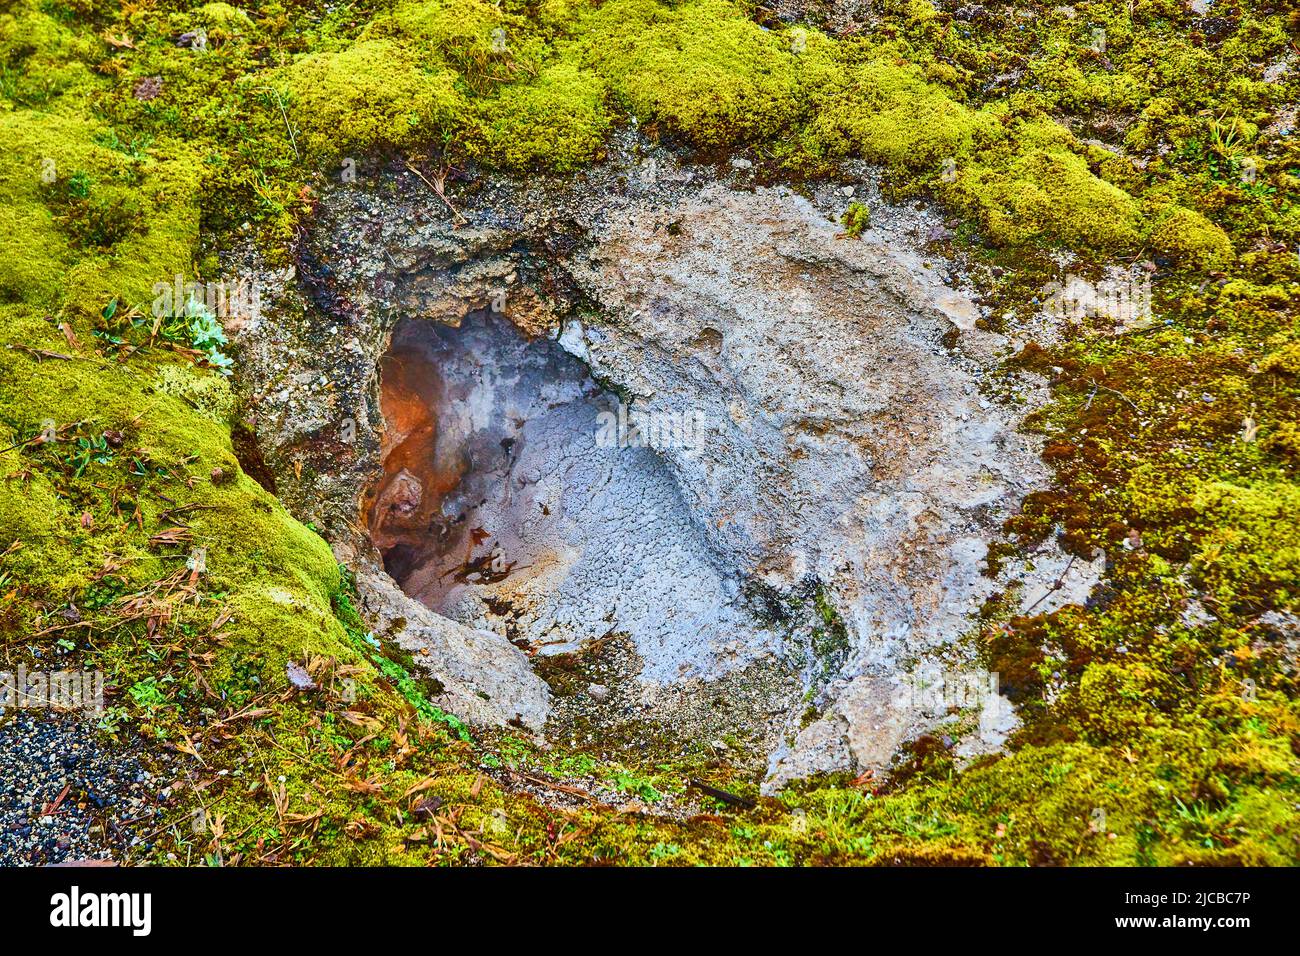 Thermal feature at Yellowstone in basin with mossy grounds Stock Photo